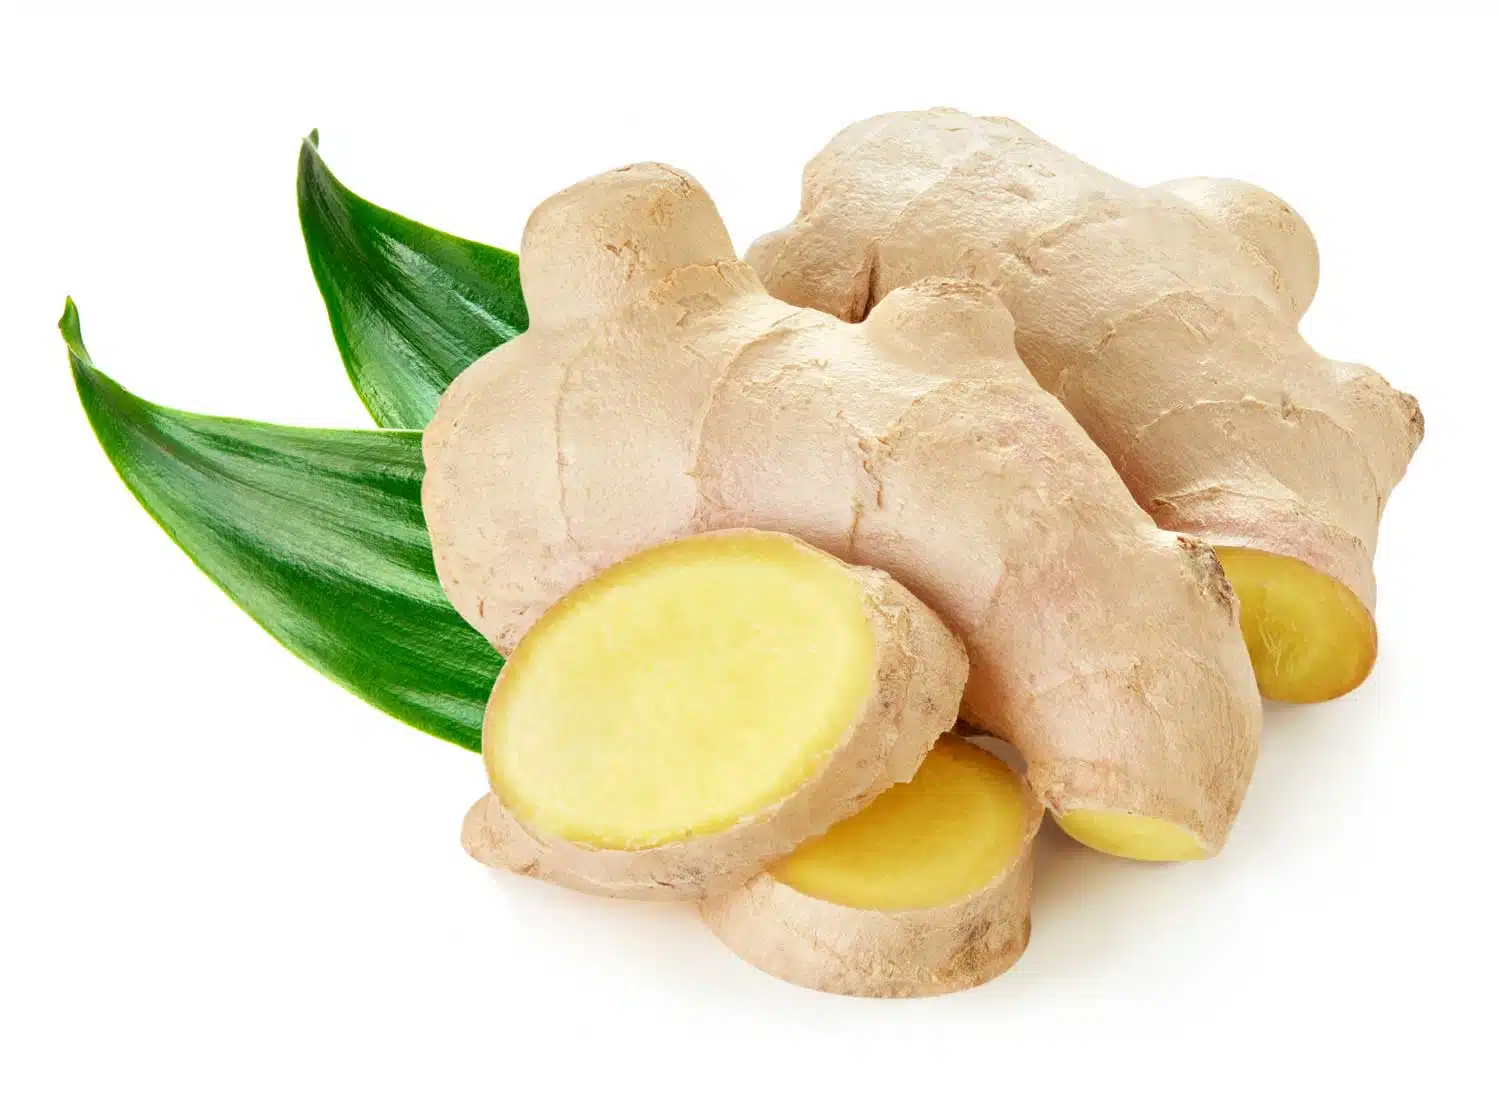 Grow ginger root